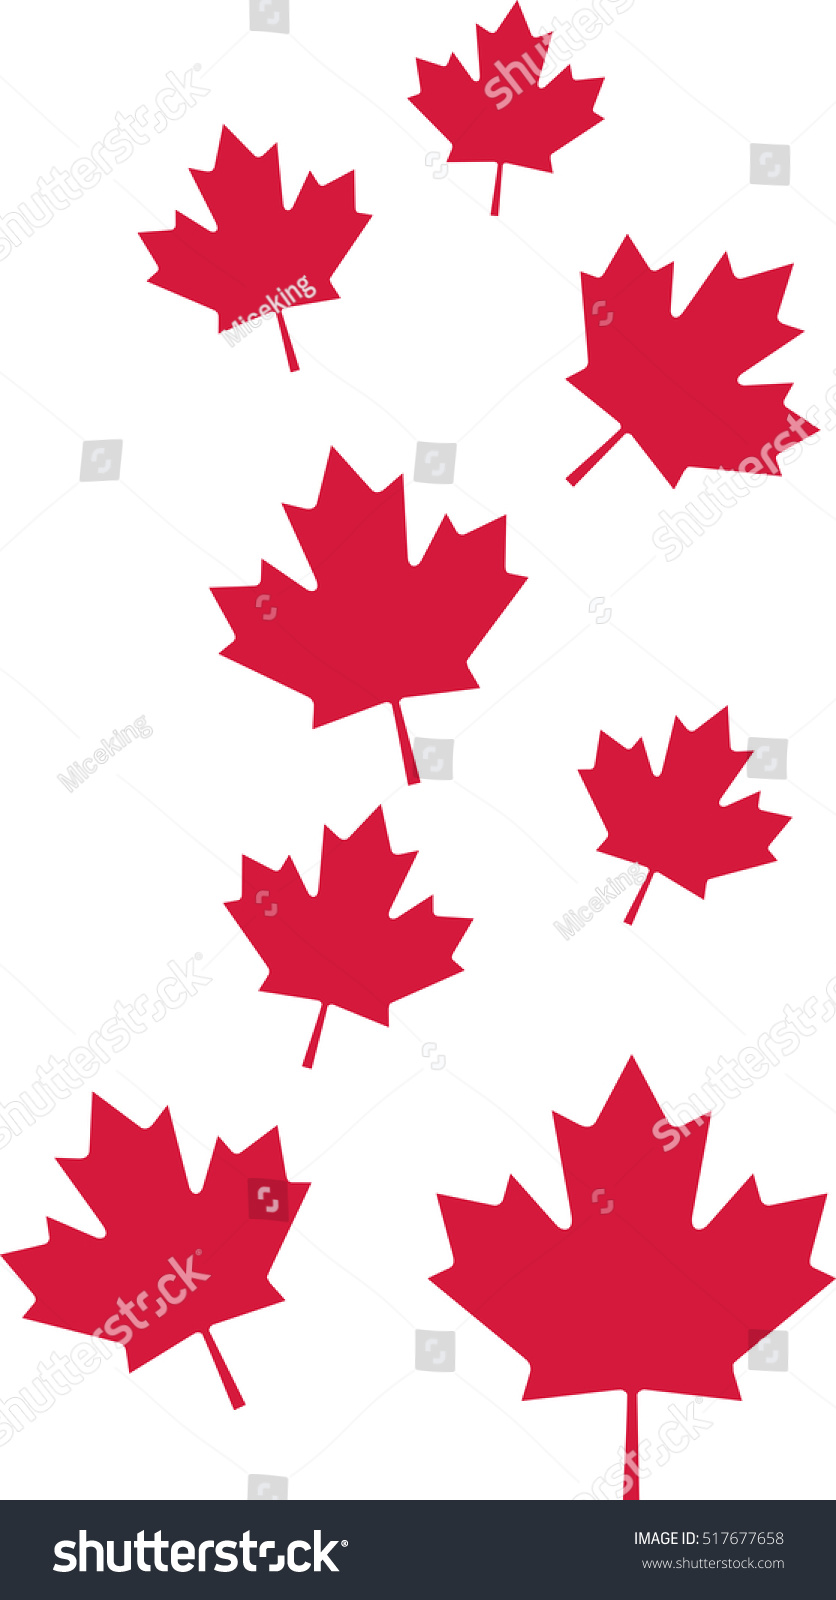 Canada Maple Leaf White Red Leaves Stock Photo 1589553025 